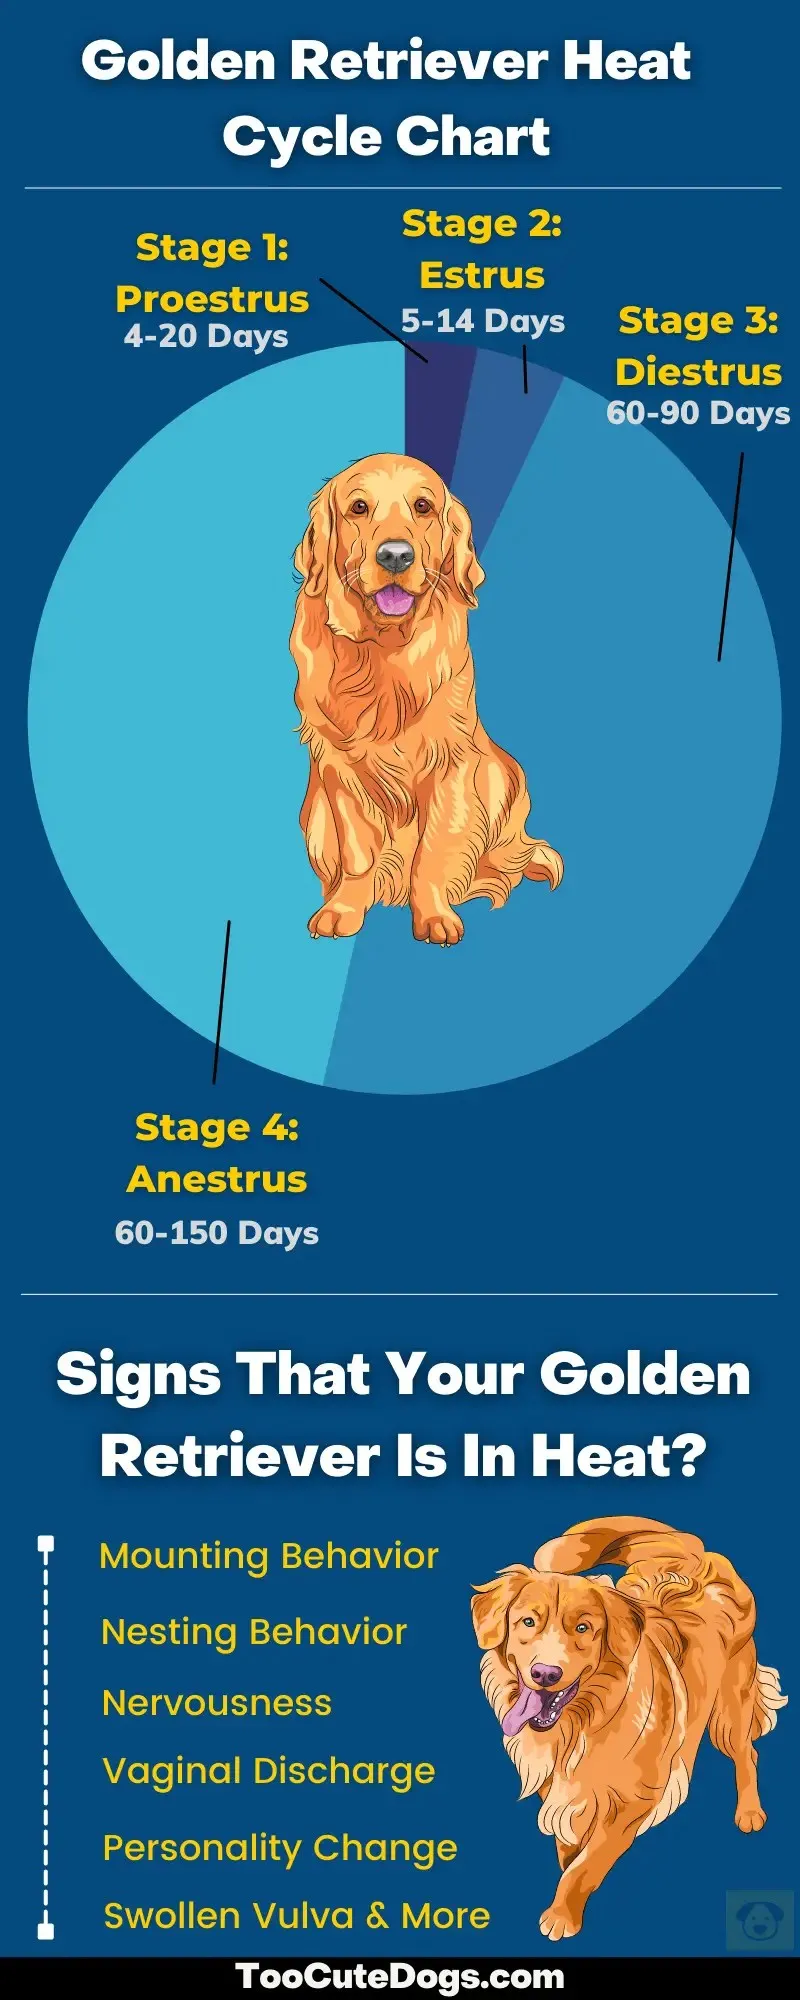 The Ultimate Guide to Understanding Your Golden Retriever’s Heat Cycle